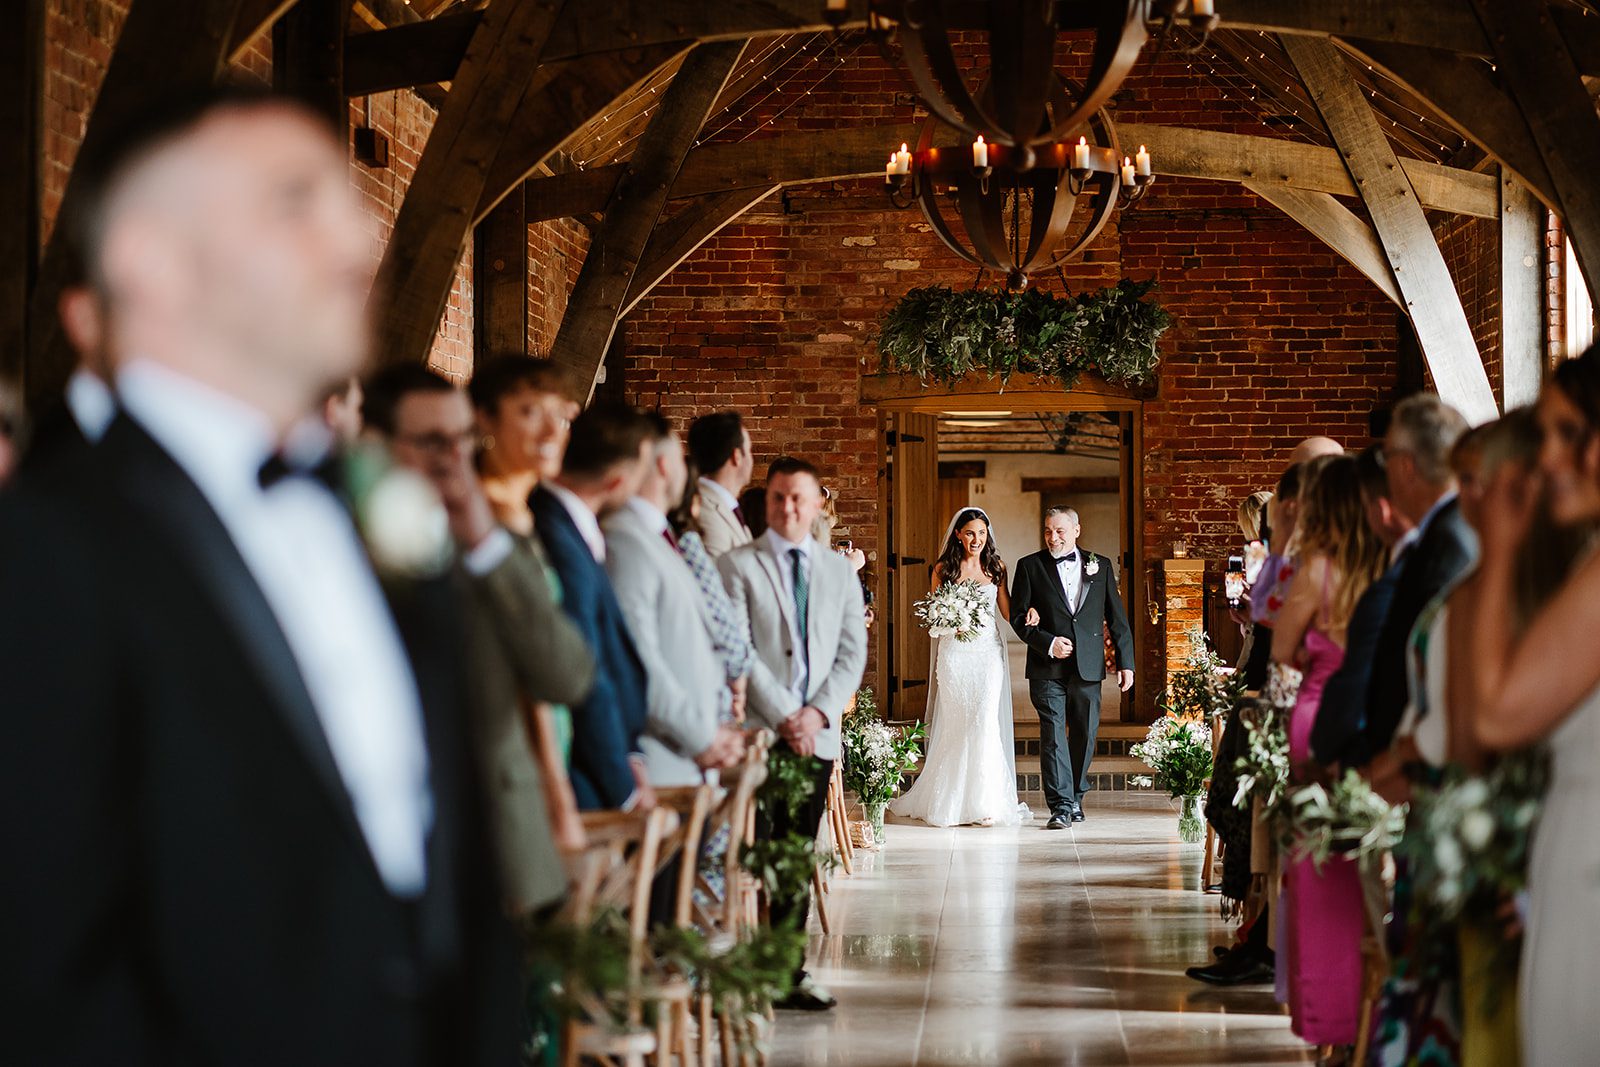 Bride and her father walk down the aisle at Grangefields Wedding venue in Derbyshire